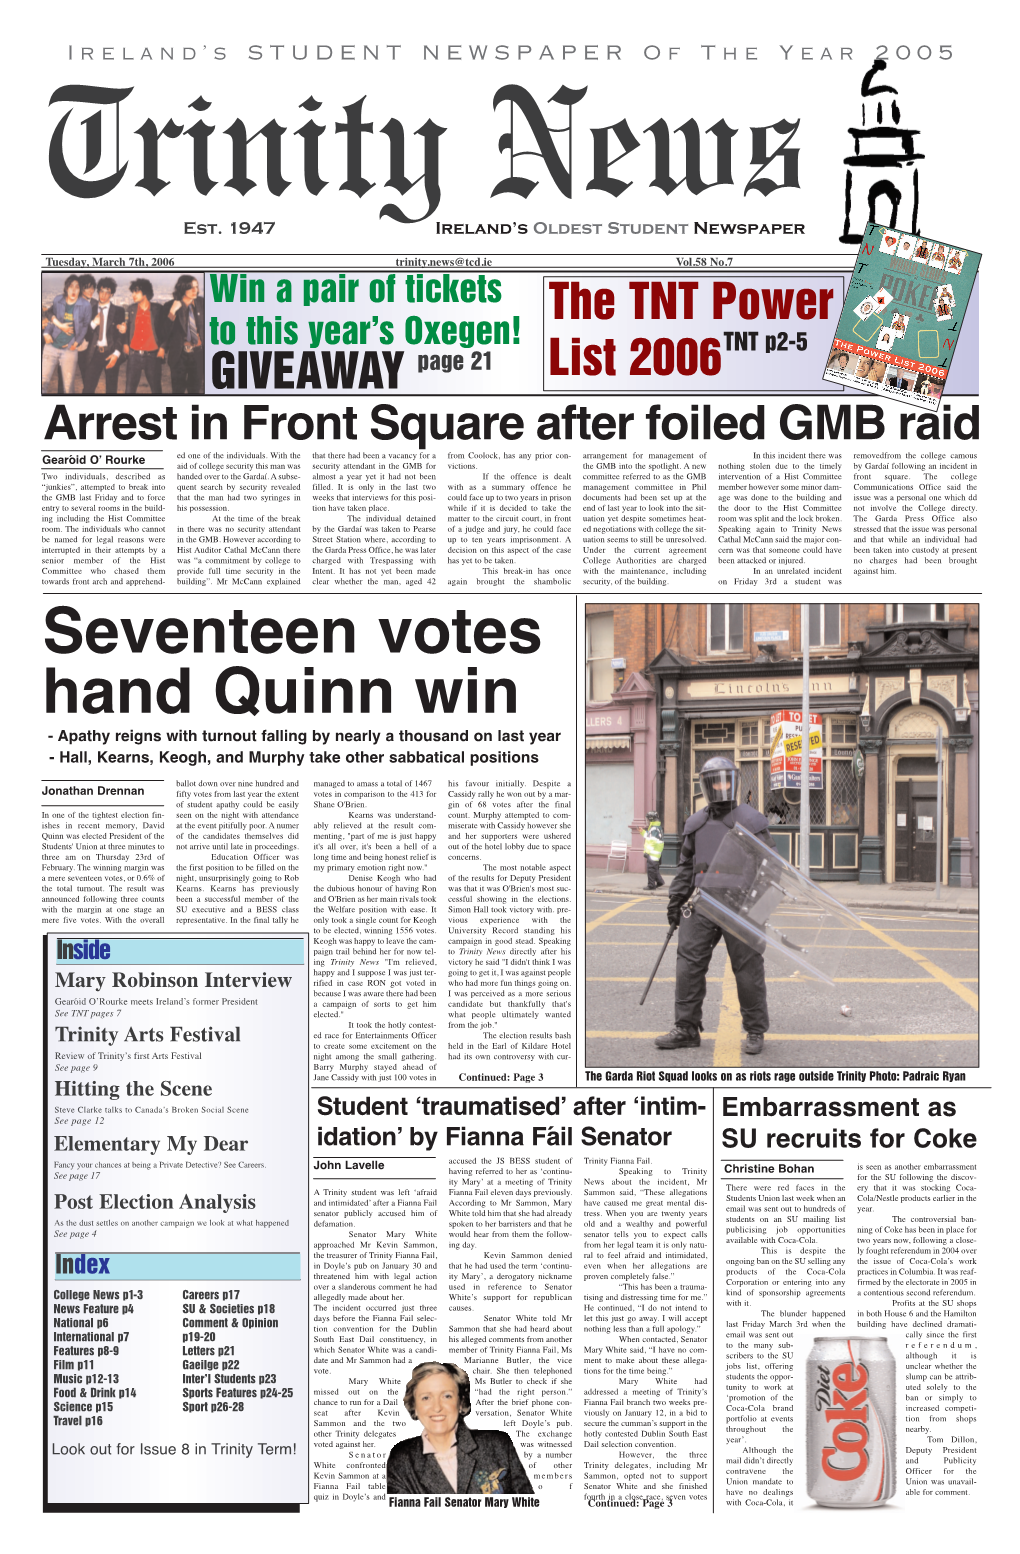 Ireland's STUDENT NEWSPAPER of the Year 2005